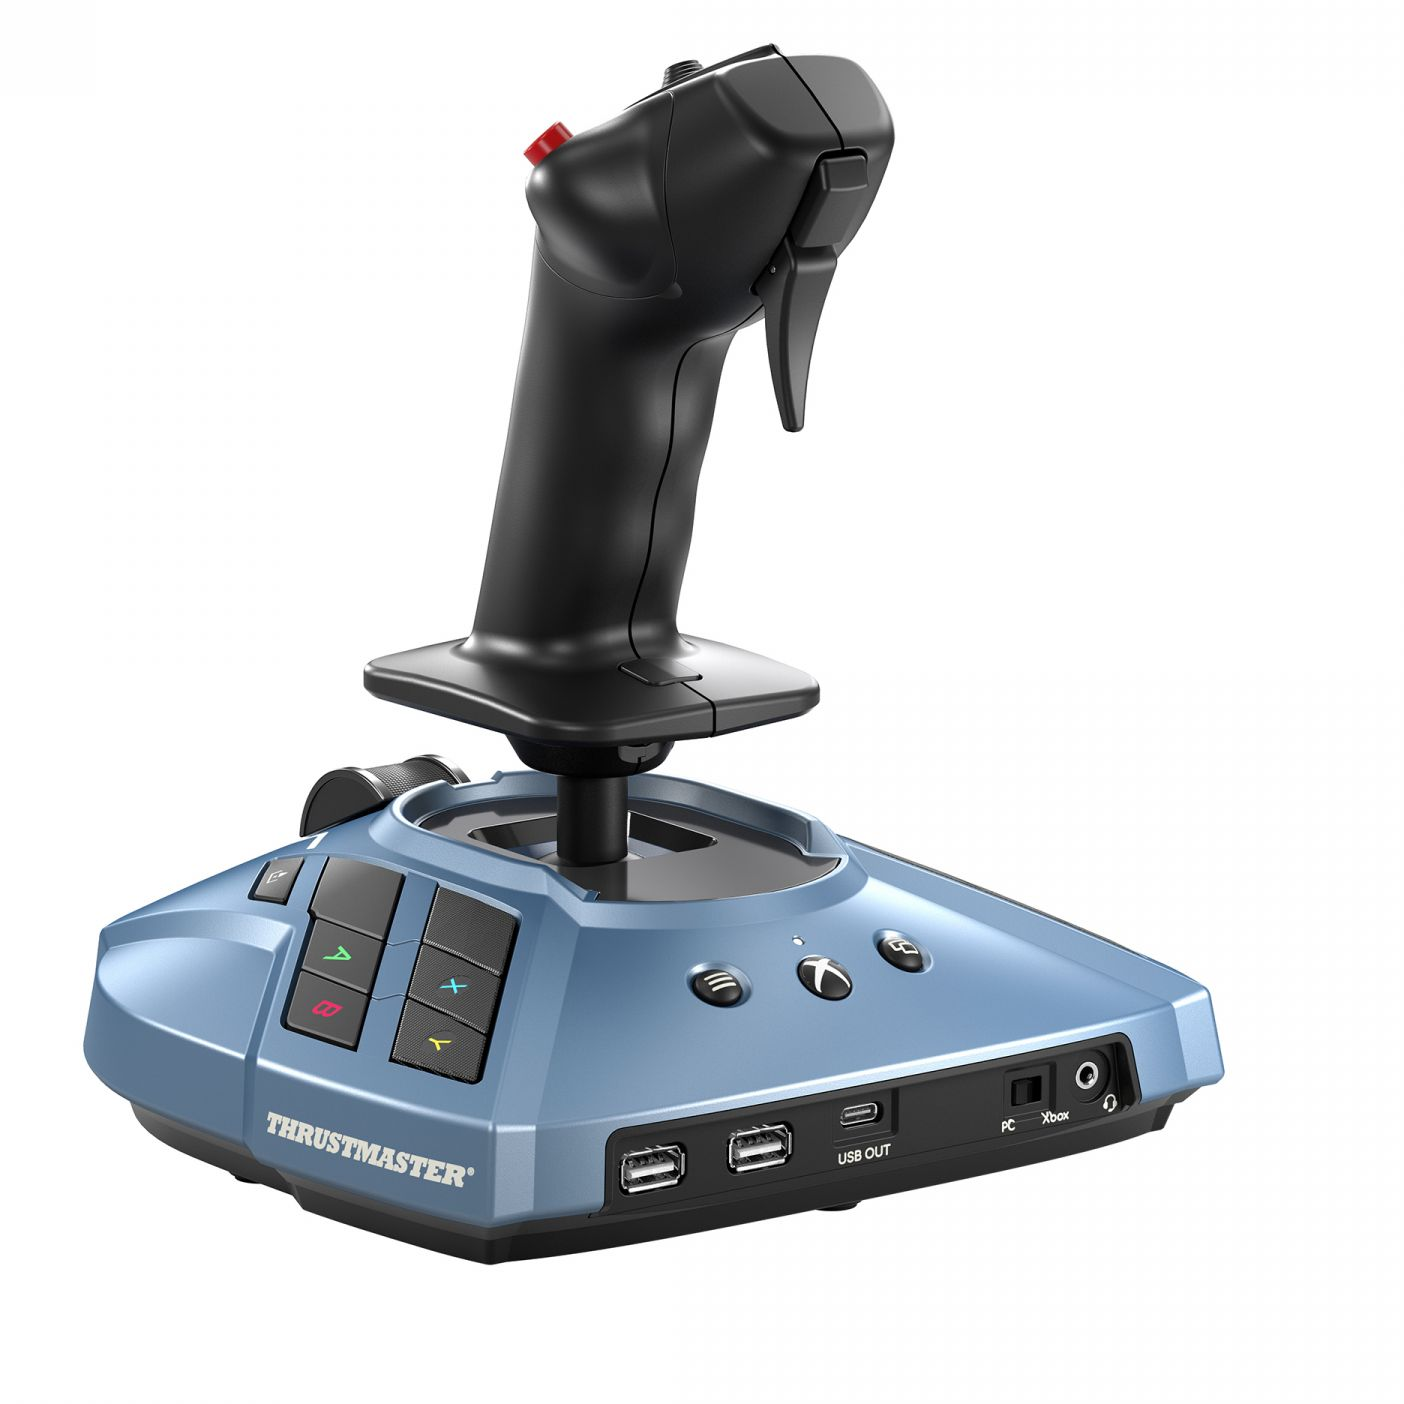 3362934403164 THRUSTMASTER TCA SIDESTICK X AIRBUS EDITION - Sidestick Computer & IT,Xbox,Xbox tilbehør 18900008770 0